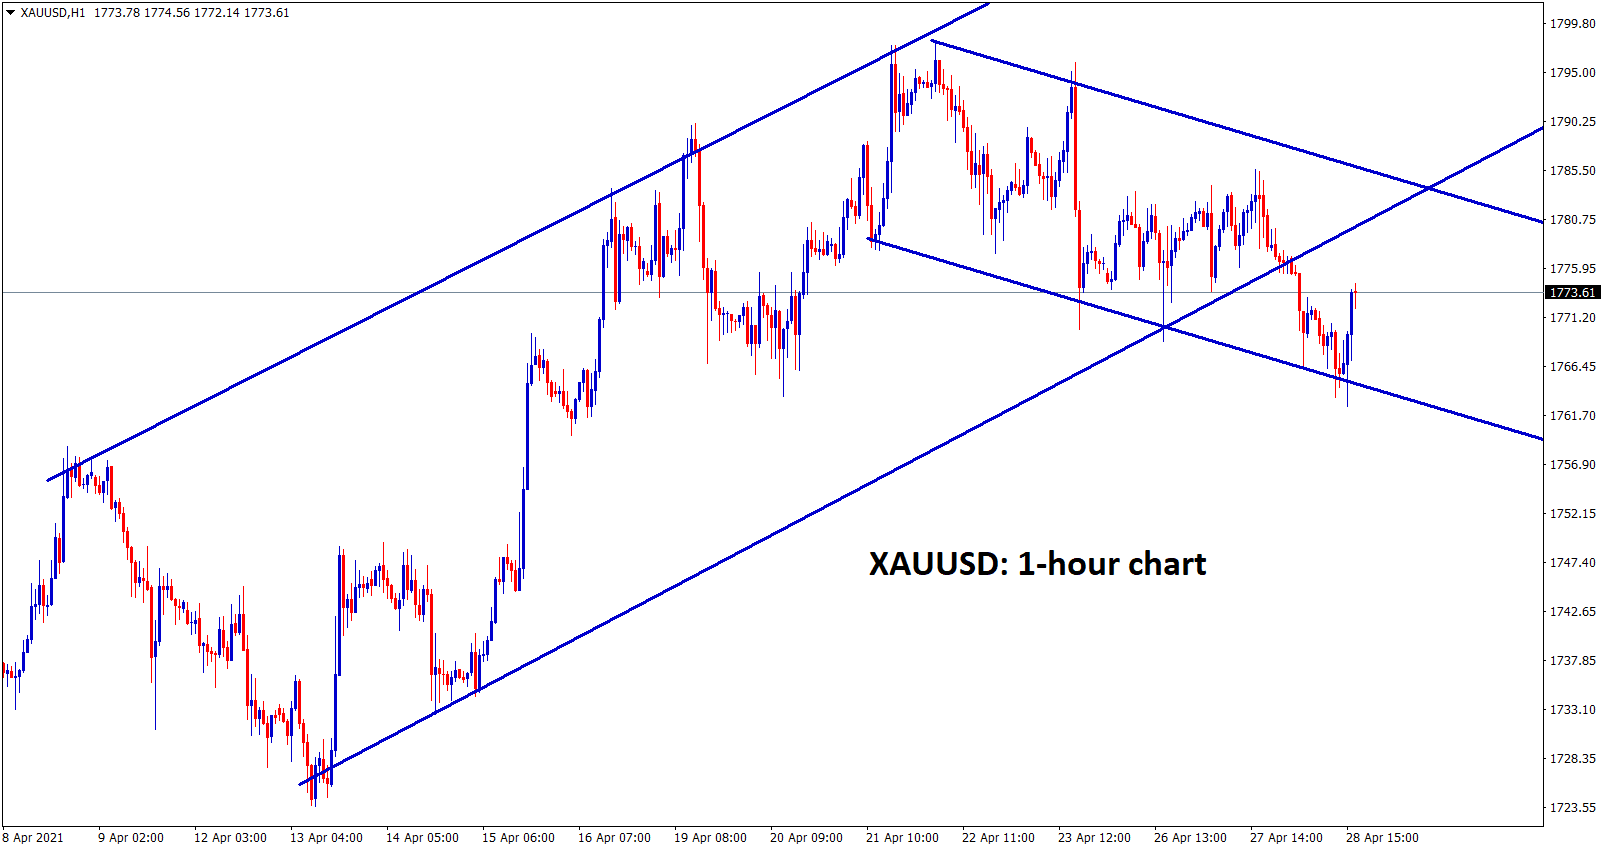 Gold is moving between the channel ranges. 1